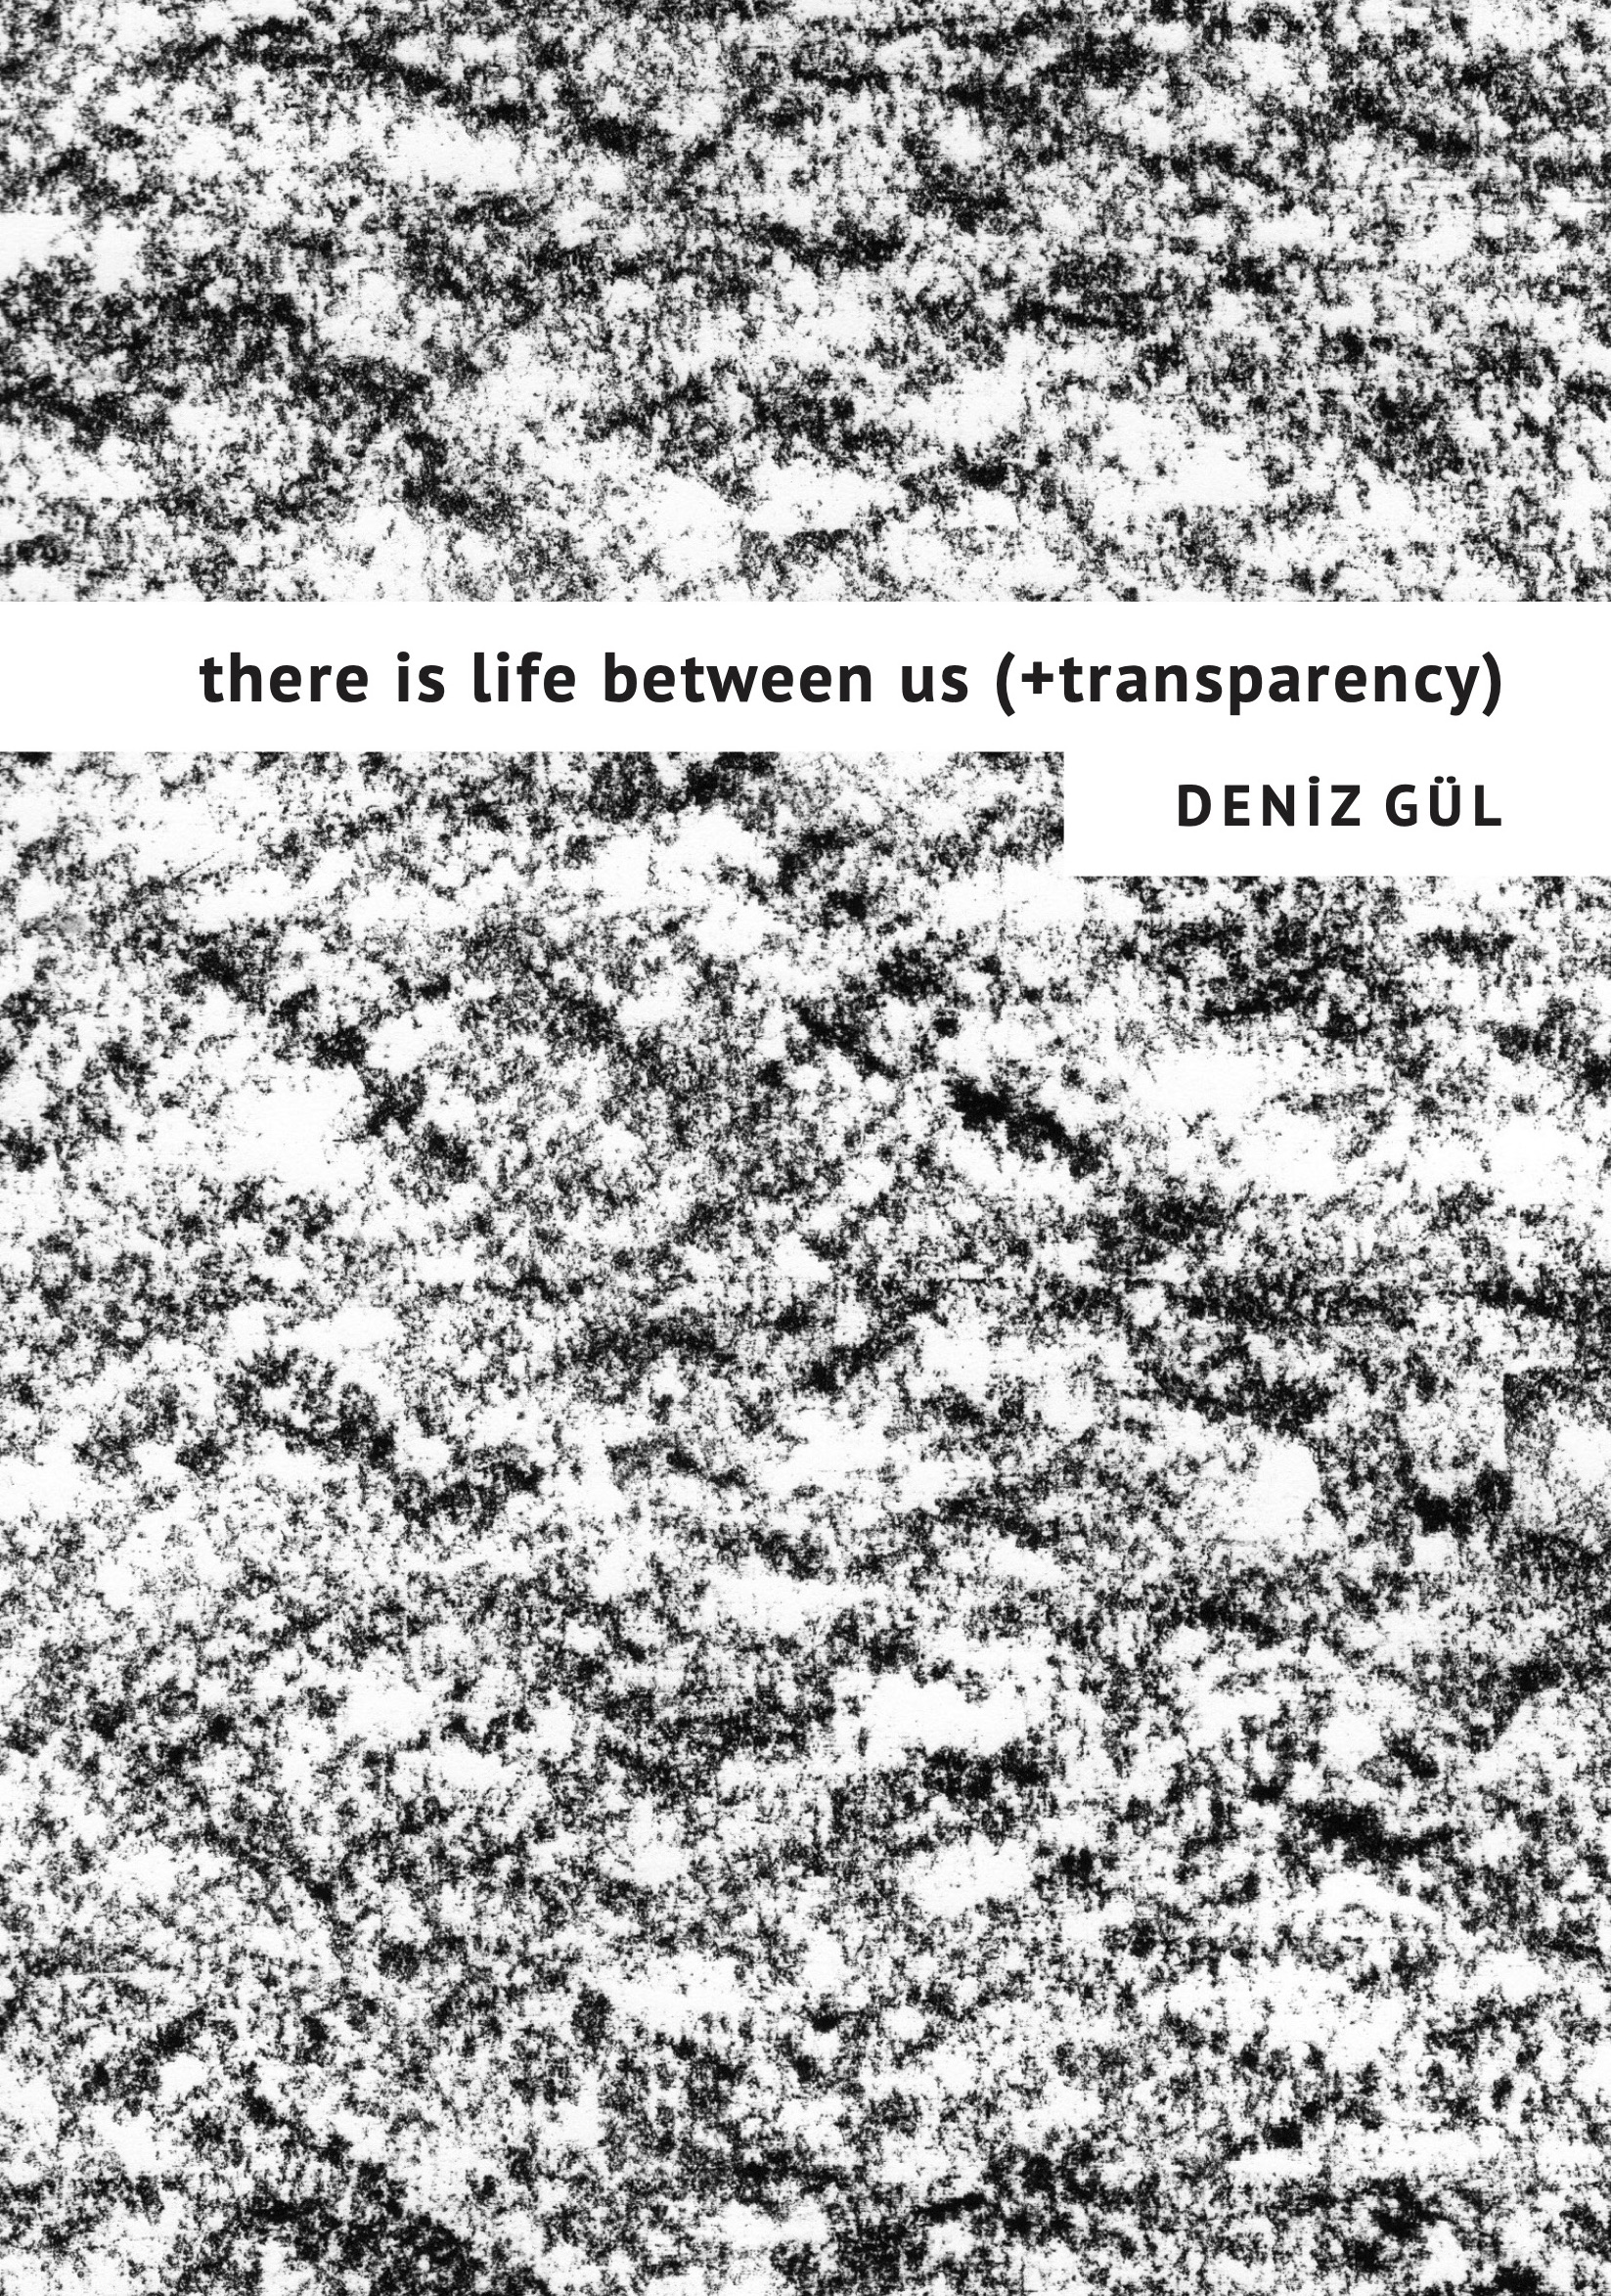 there is life between us (+transparency